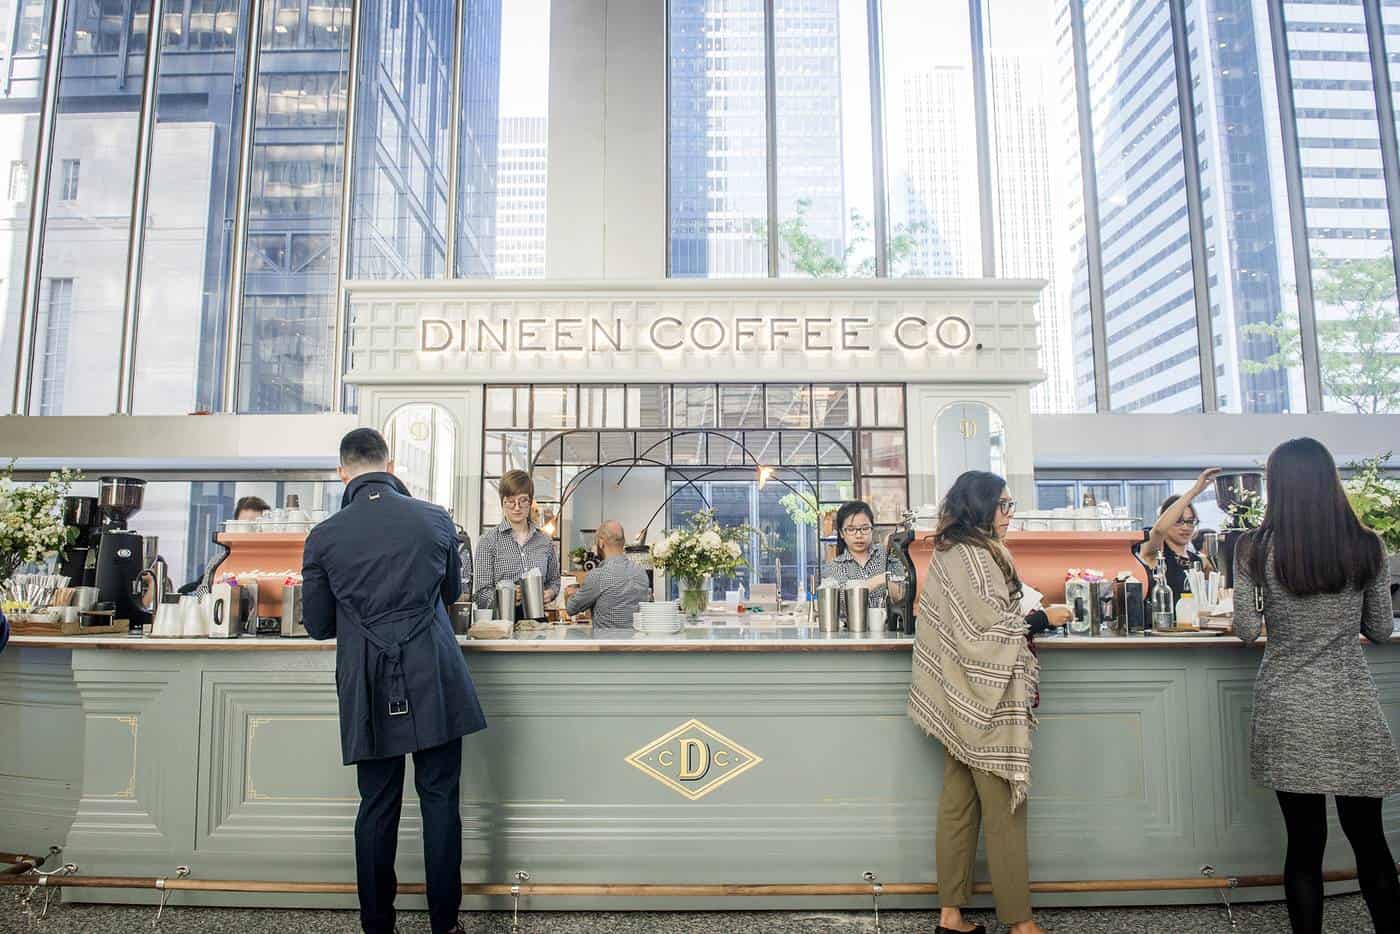 Commerce Court & Dineen Coffee Co.